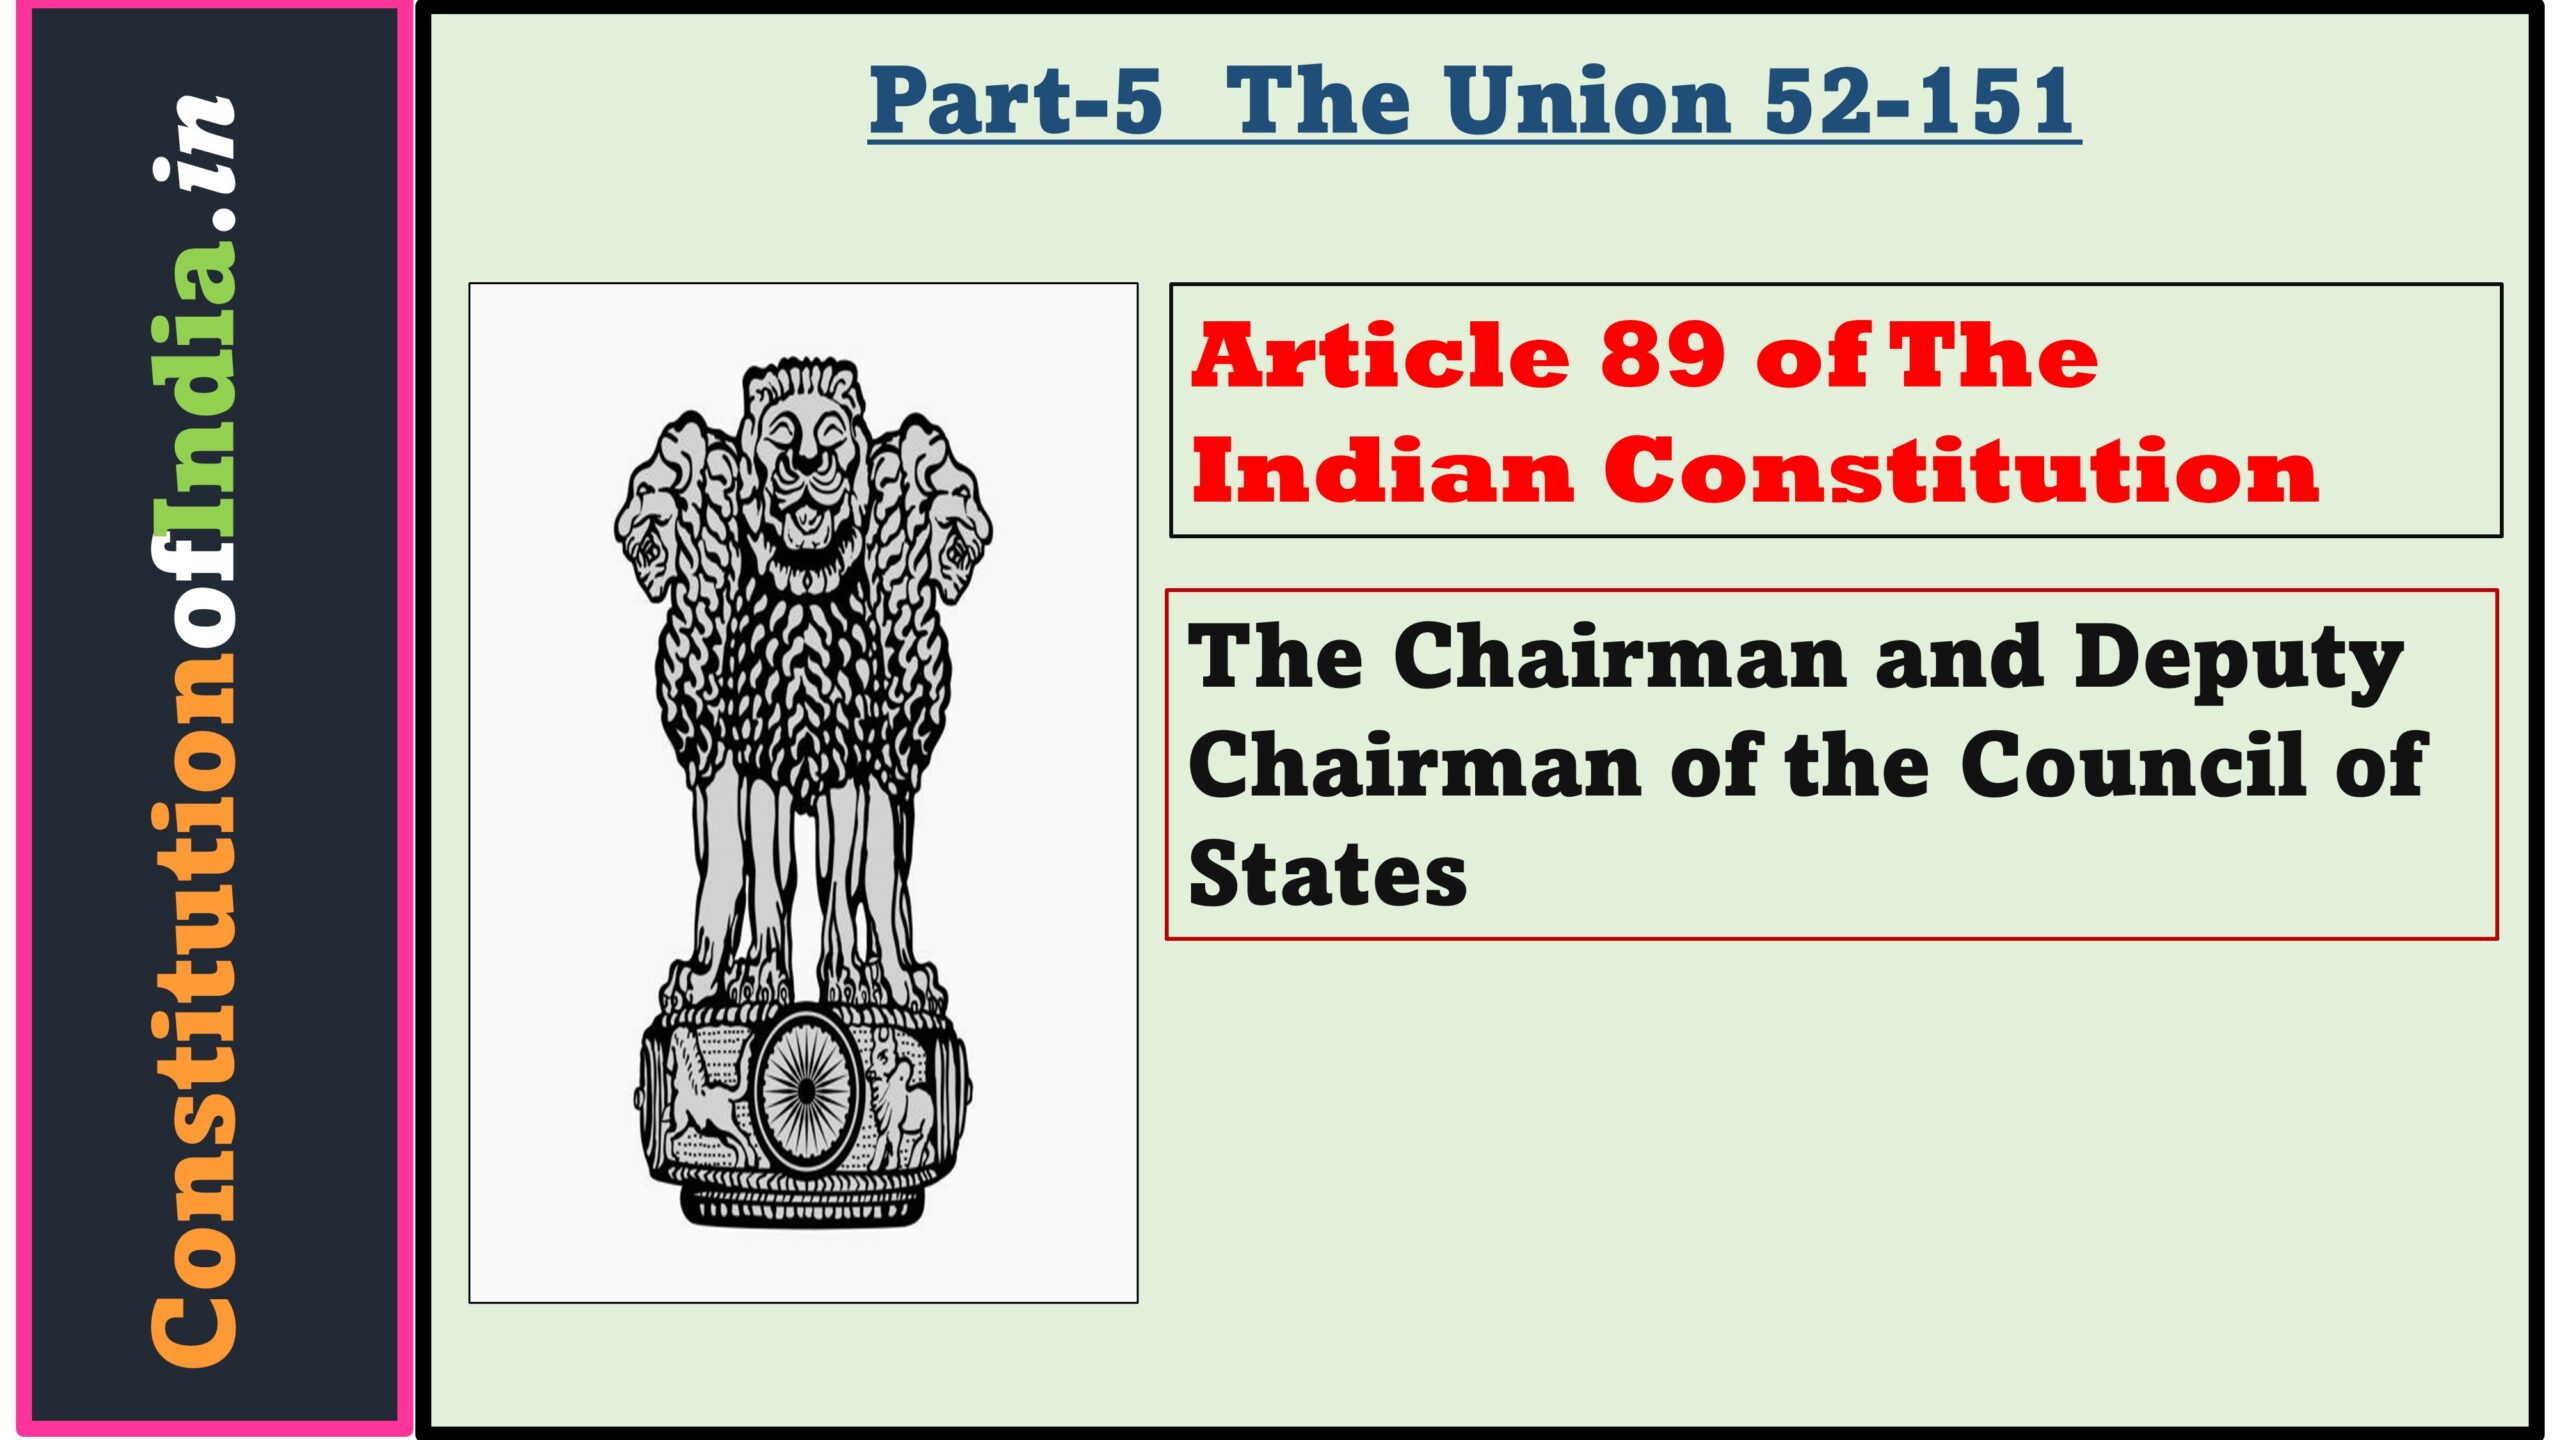 Article 89 of The Indian Constitution